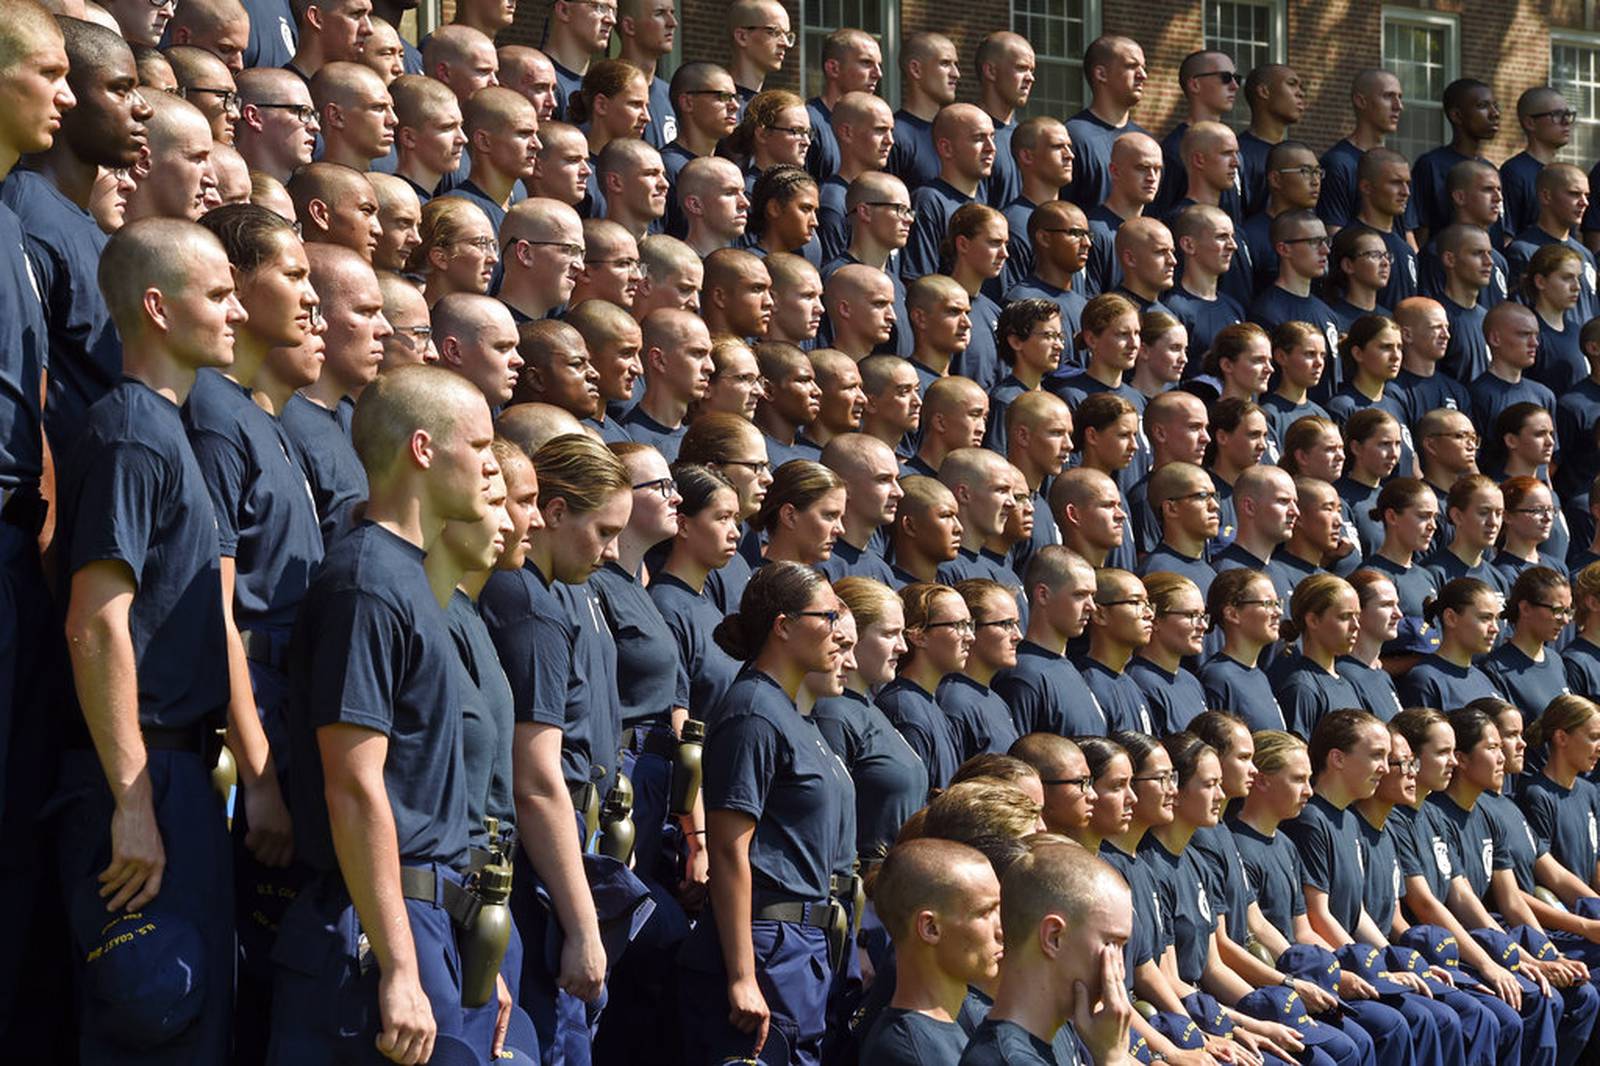 cadets-turn-out-at-coast-guard-academy-for-start-of-training